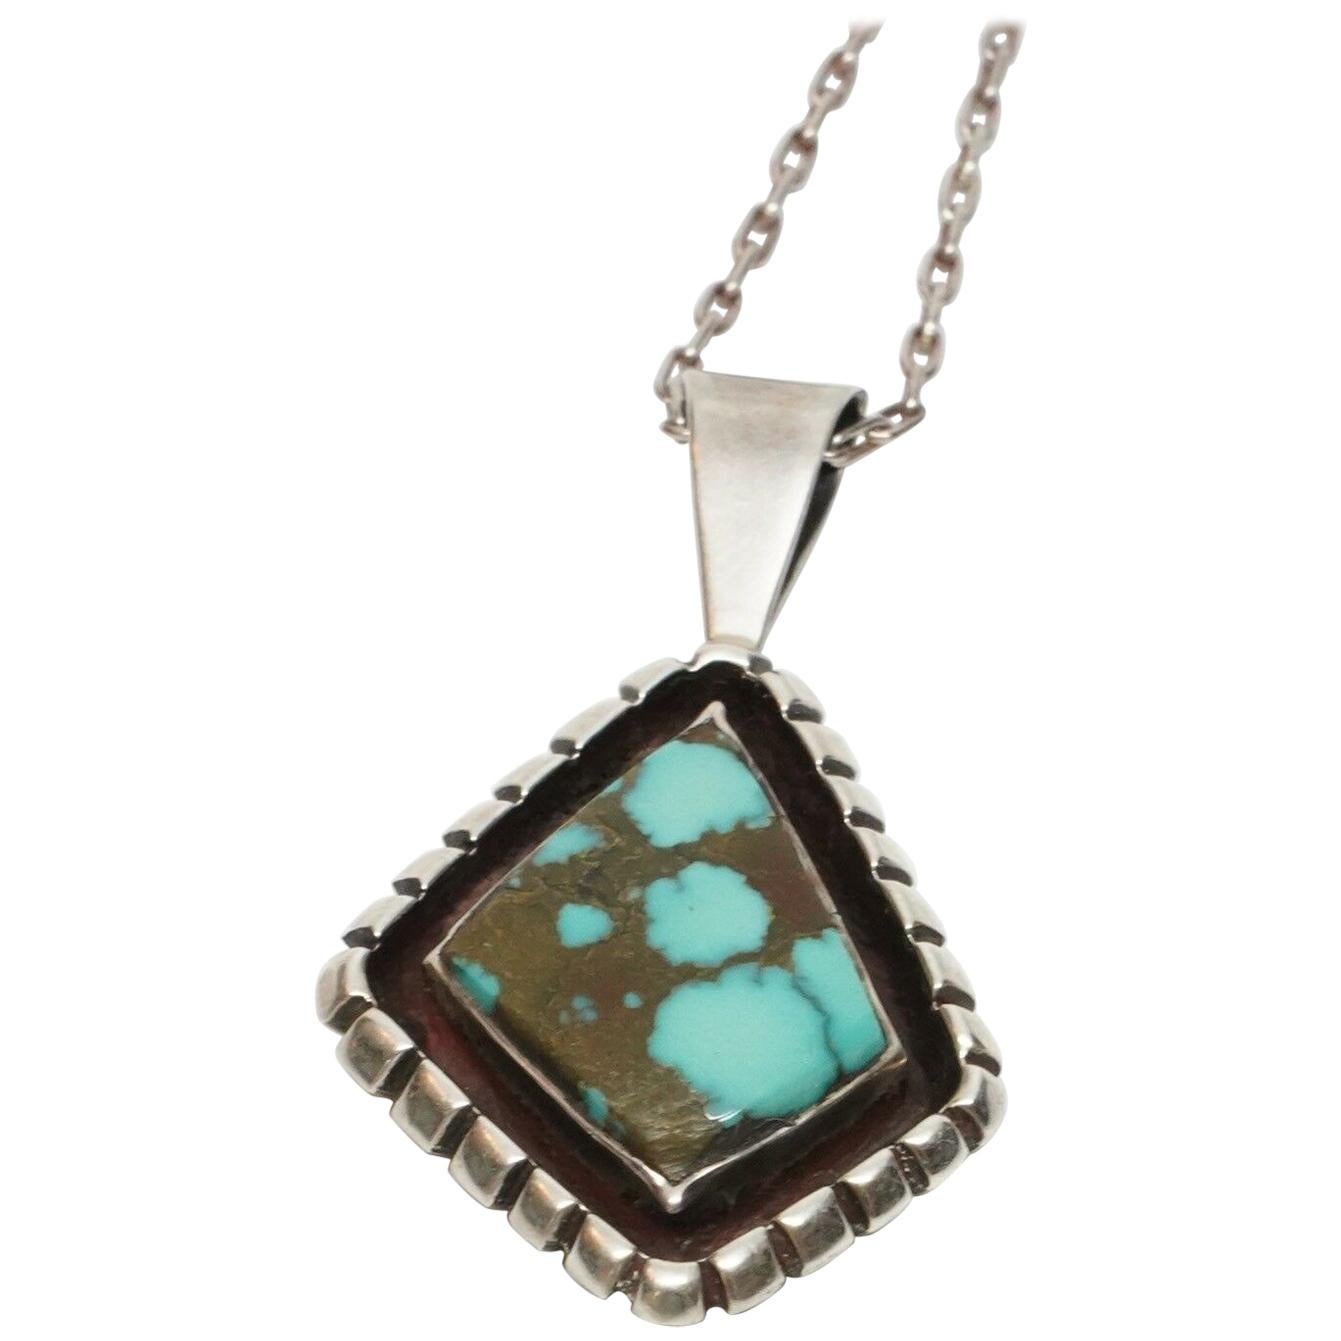 Navajo Native American Turquoise Pendant Necklace by Eugene Belone EB